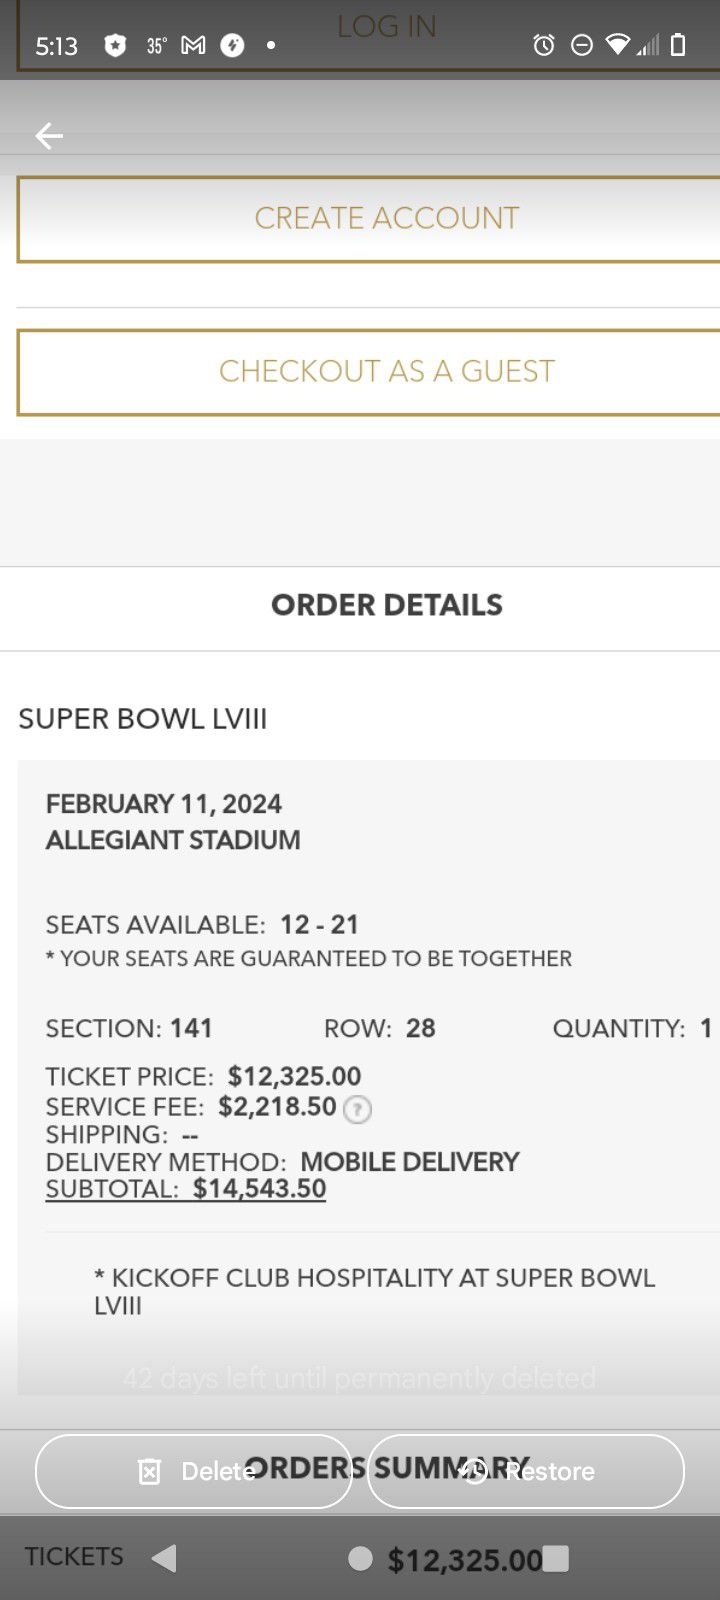 Selling My Super Bowl Ticket